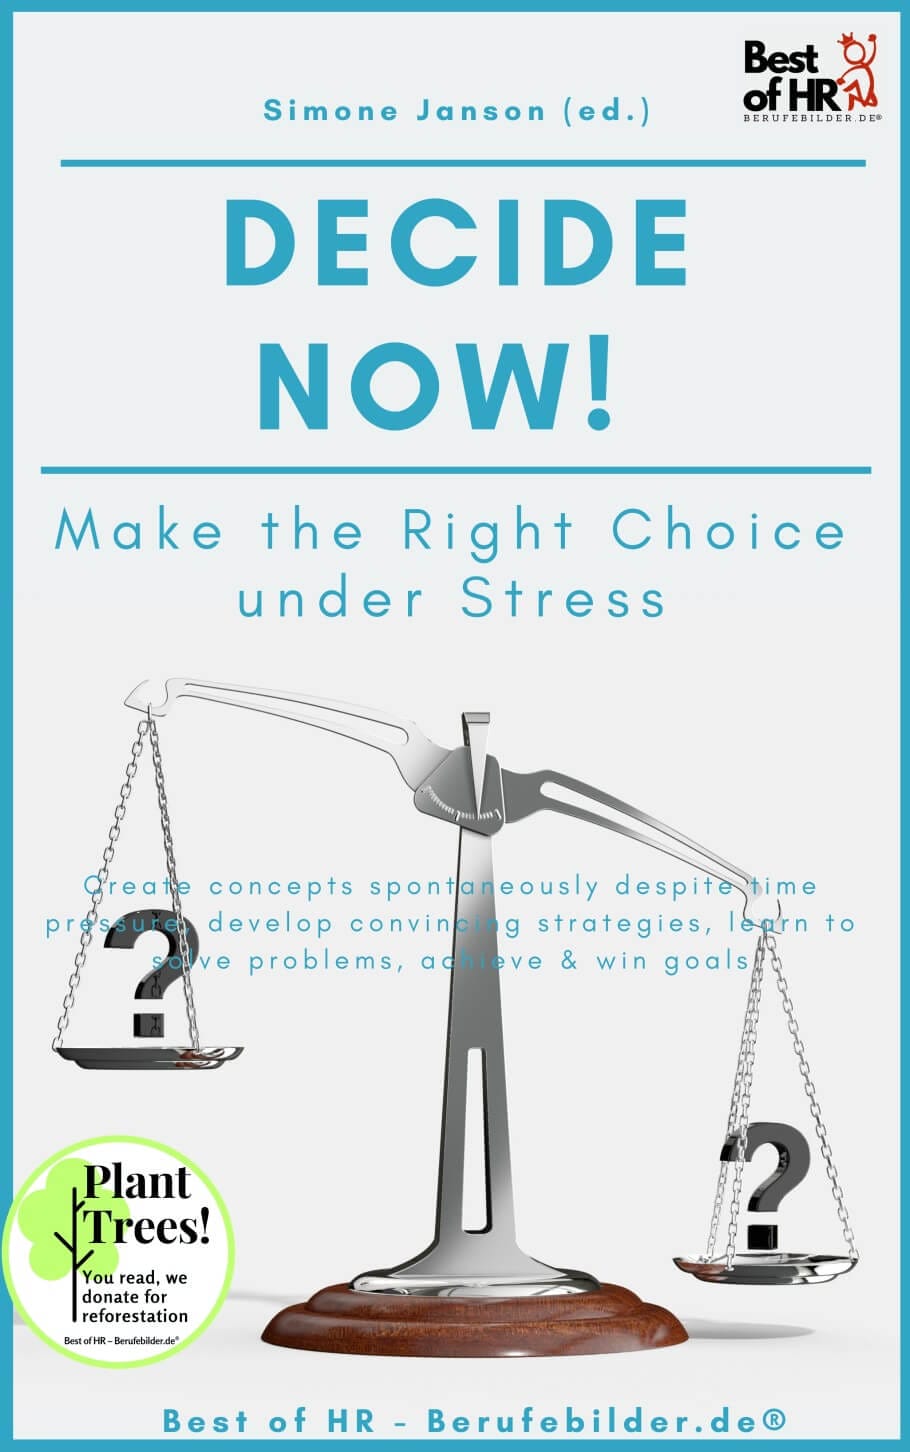 Decide now! Make the Right Choice under Stress (Engl. Version)